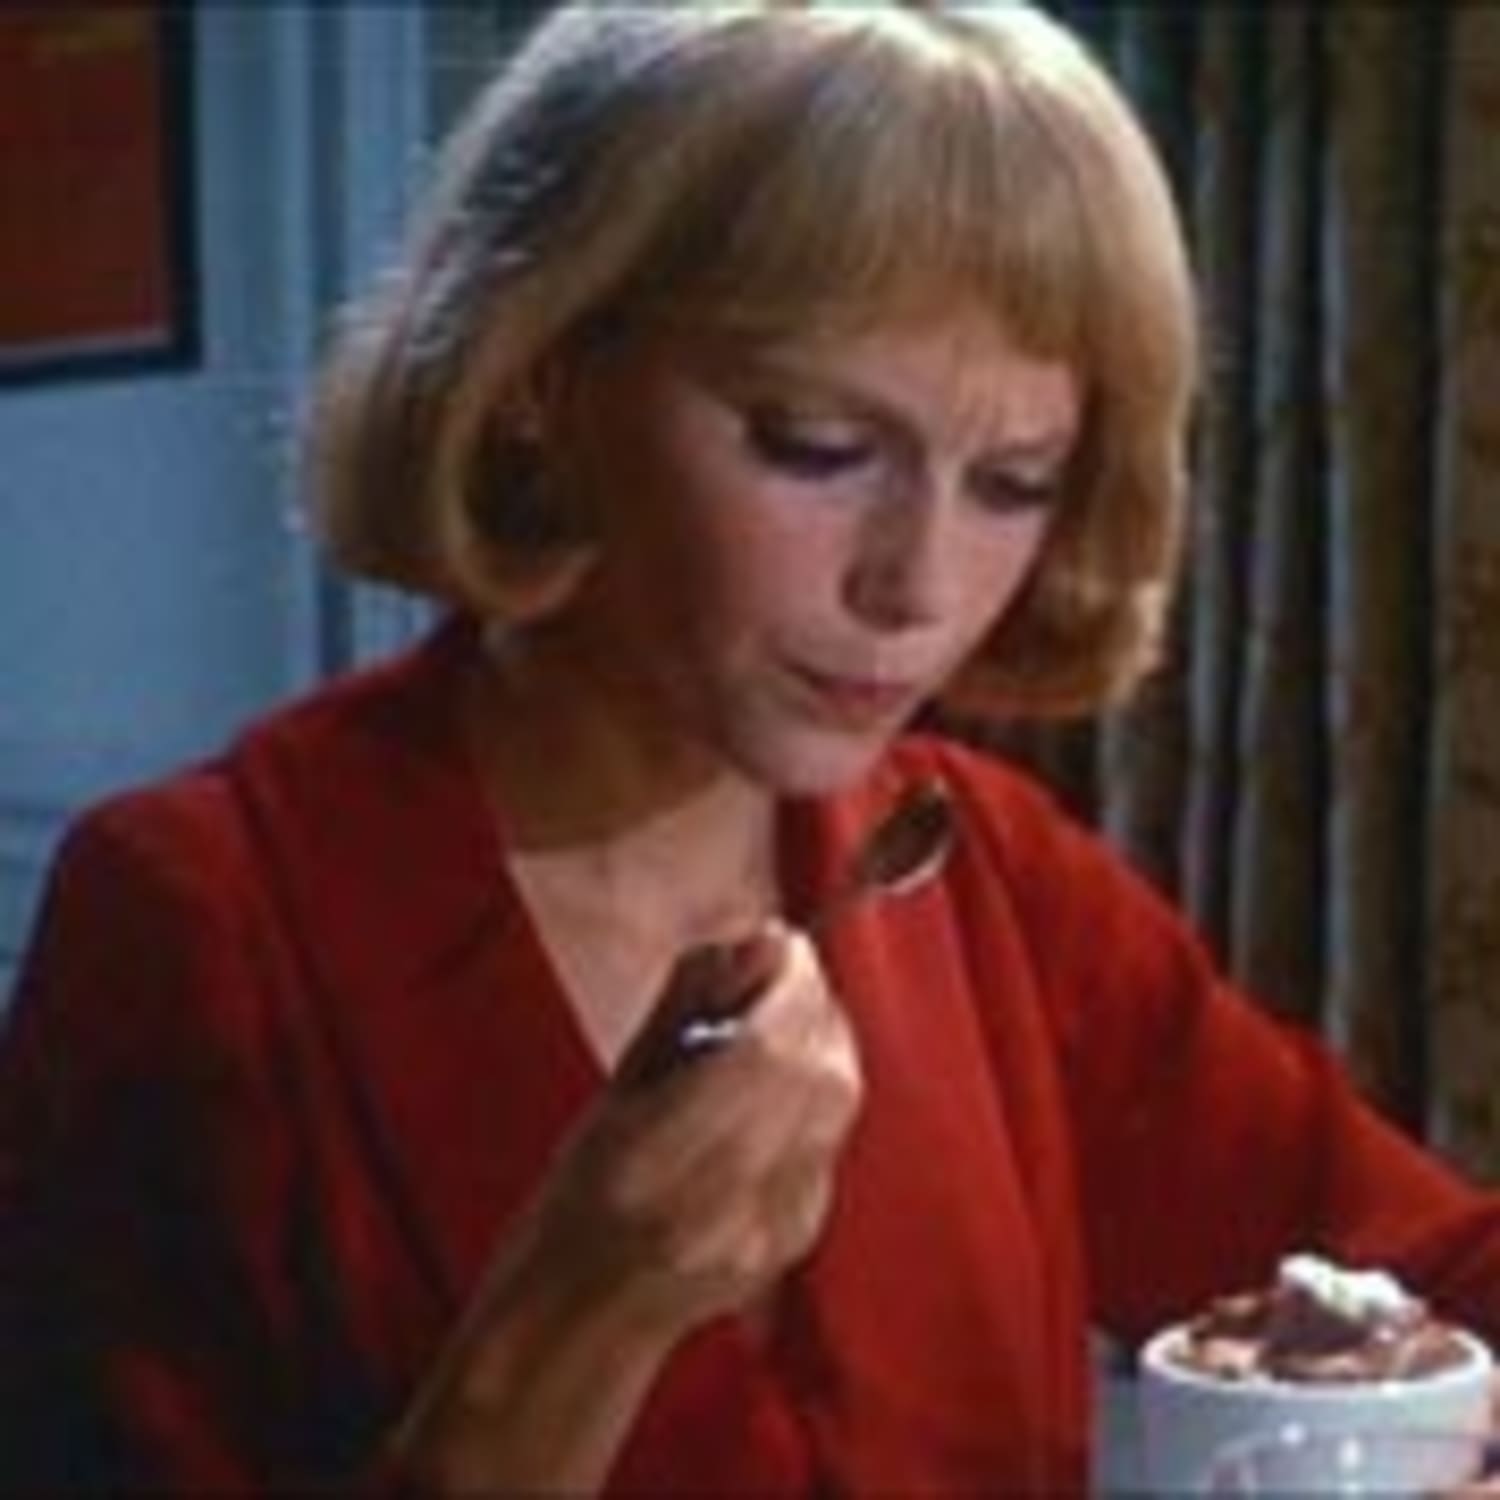 The Celluloid Pantry: Chocolate “Mouse” and Rosemary's Baby (1968